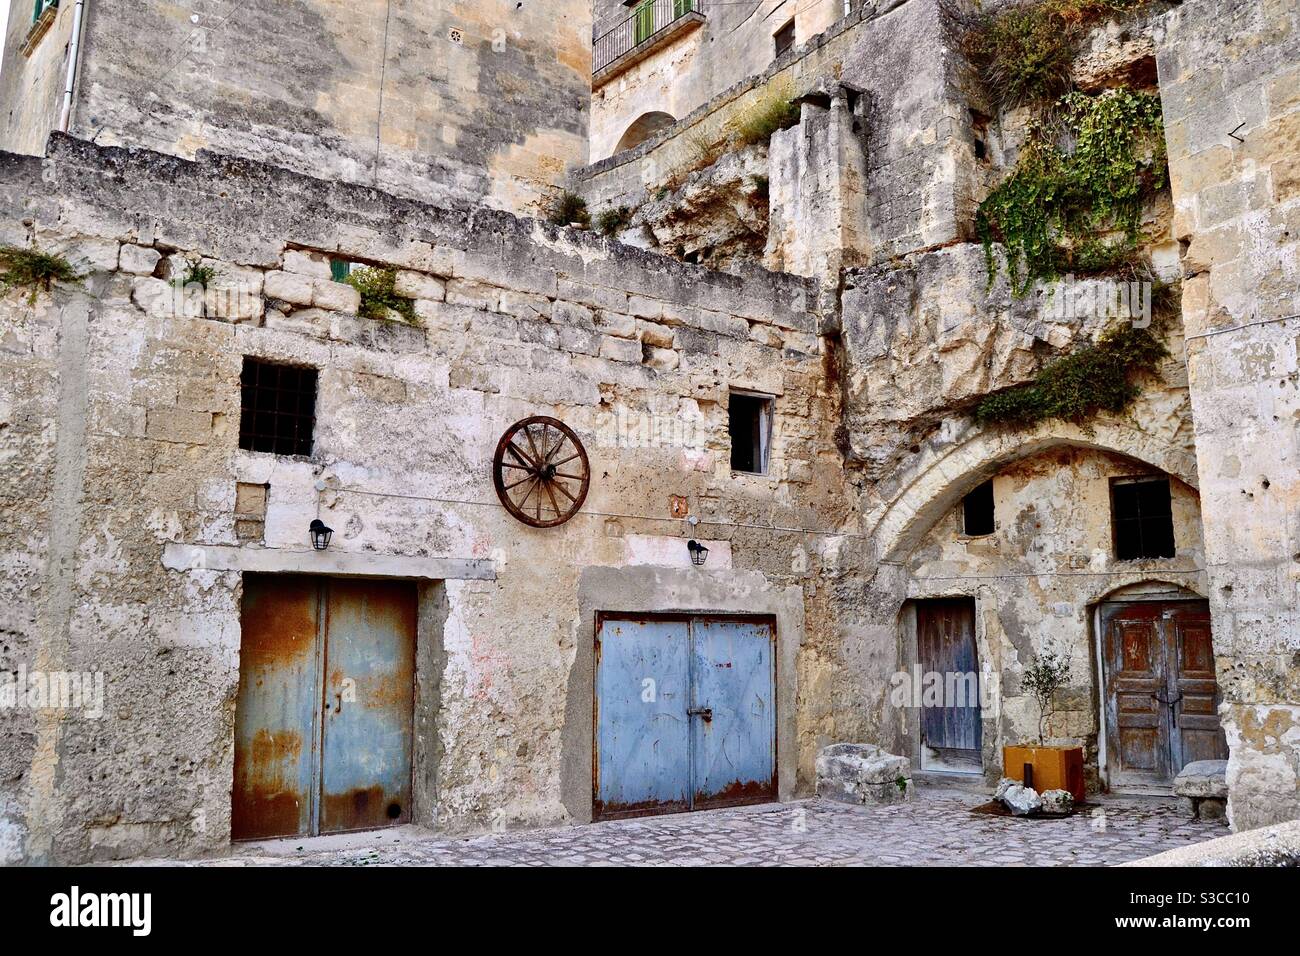 Ancient southern Italian rustic, atmospheric, residential, and romantic courtyard with rusty blue metal doors, small dark square windows and decorative iron cartwheel in Matera, Italy. Stock Photo